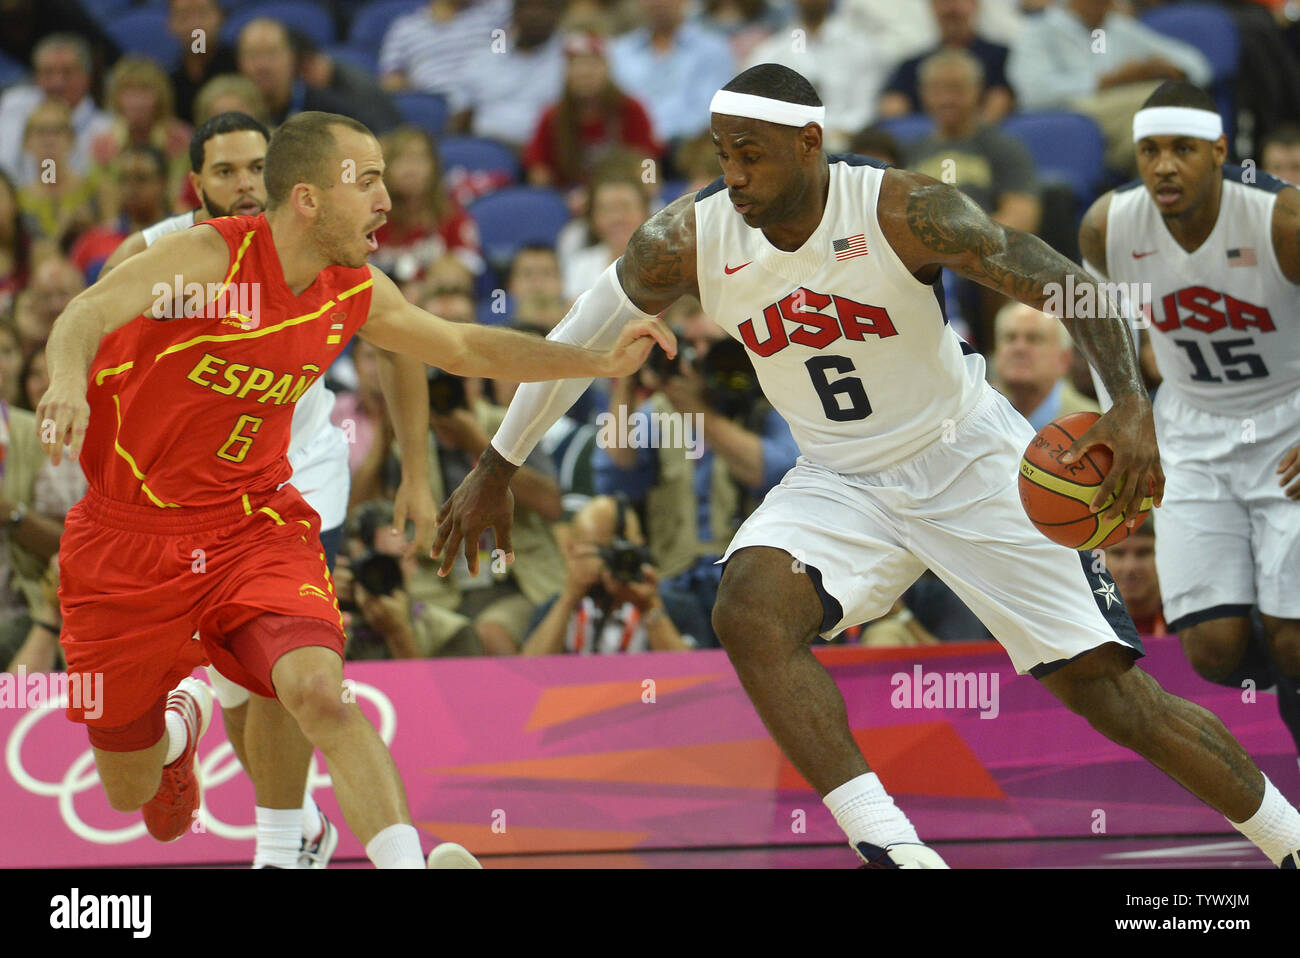 United States' Lebron James sttempts to dribble around Spain's Sergio  Rodriguez during the USA-Spain Men's Basketball Gold Medal Medal game at  the 2012 Summer Olympics, August 12, 2012, in London, England. UPI/Mike